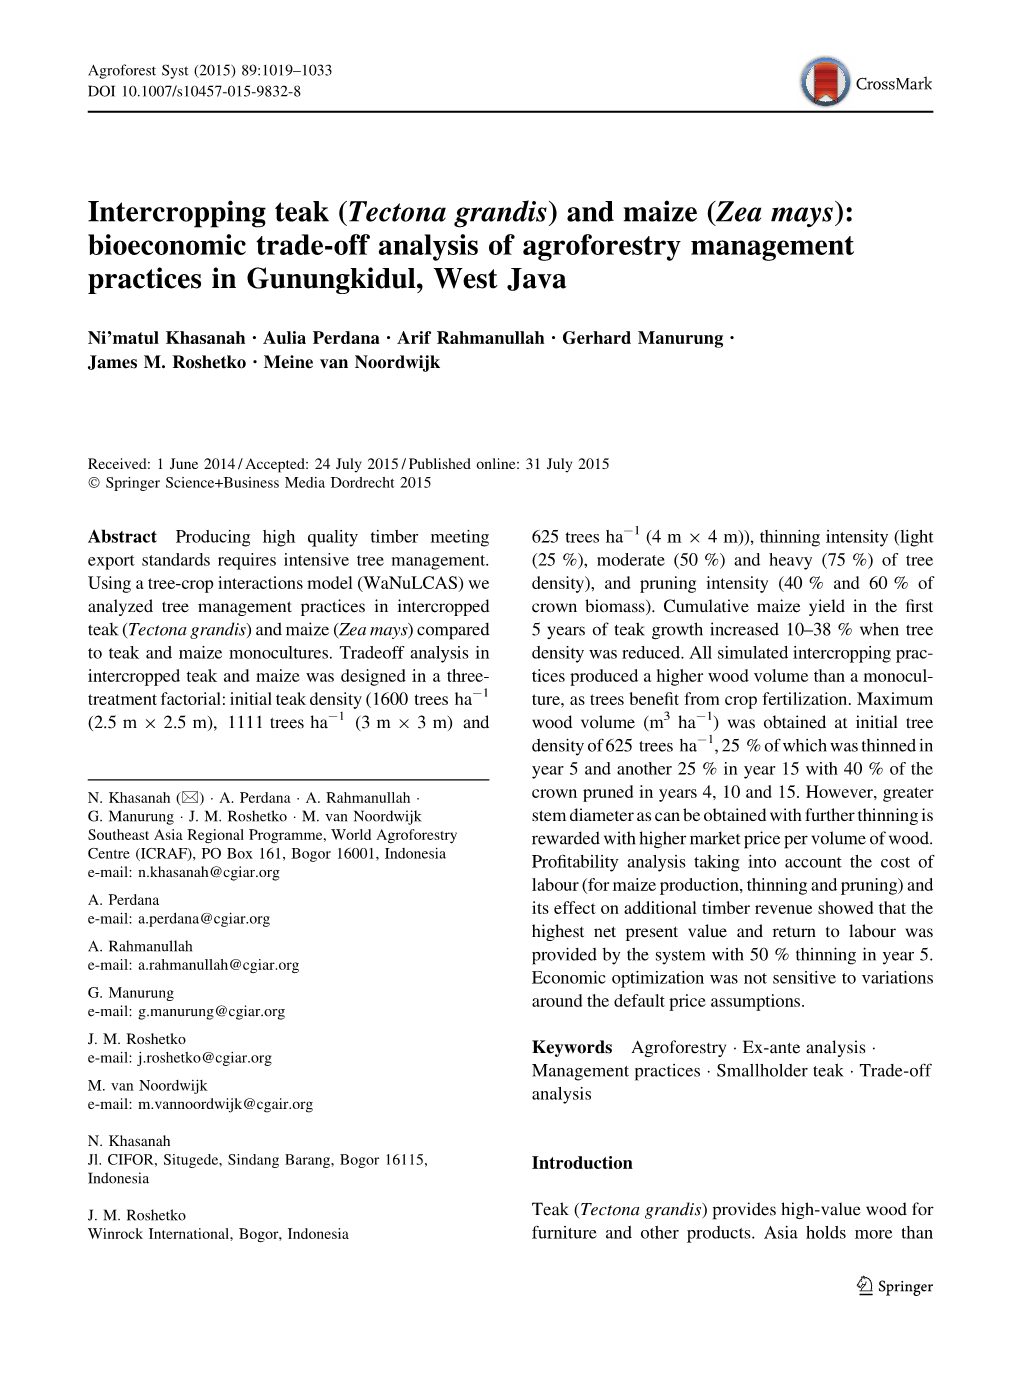 Intercropping Teak (Tectona Grandis) and Maize (Zea Mays): Bioeconomic Trade-Off Analysis of Agroforestry Management Practices in Gunungkidul, West Java